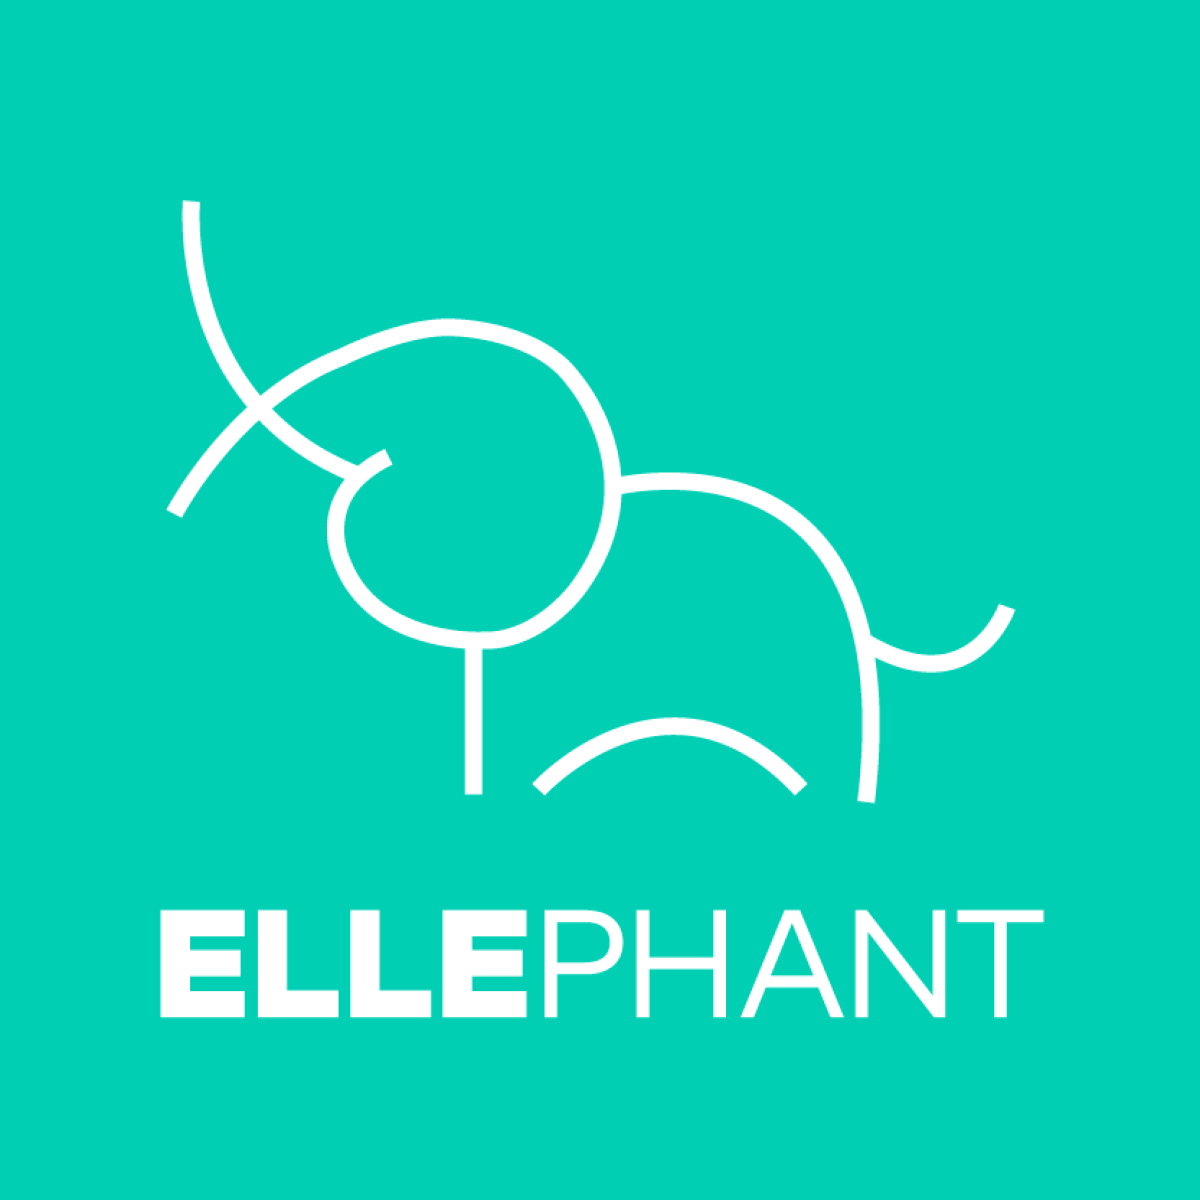 A new Los Angeles public relations firm serving tech companies is aiming to work mostly with clients from backgrounds underrepresented in the industry. (Ellephant Partners)